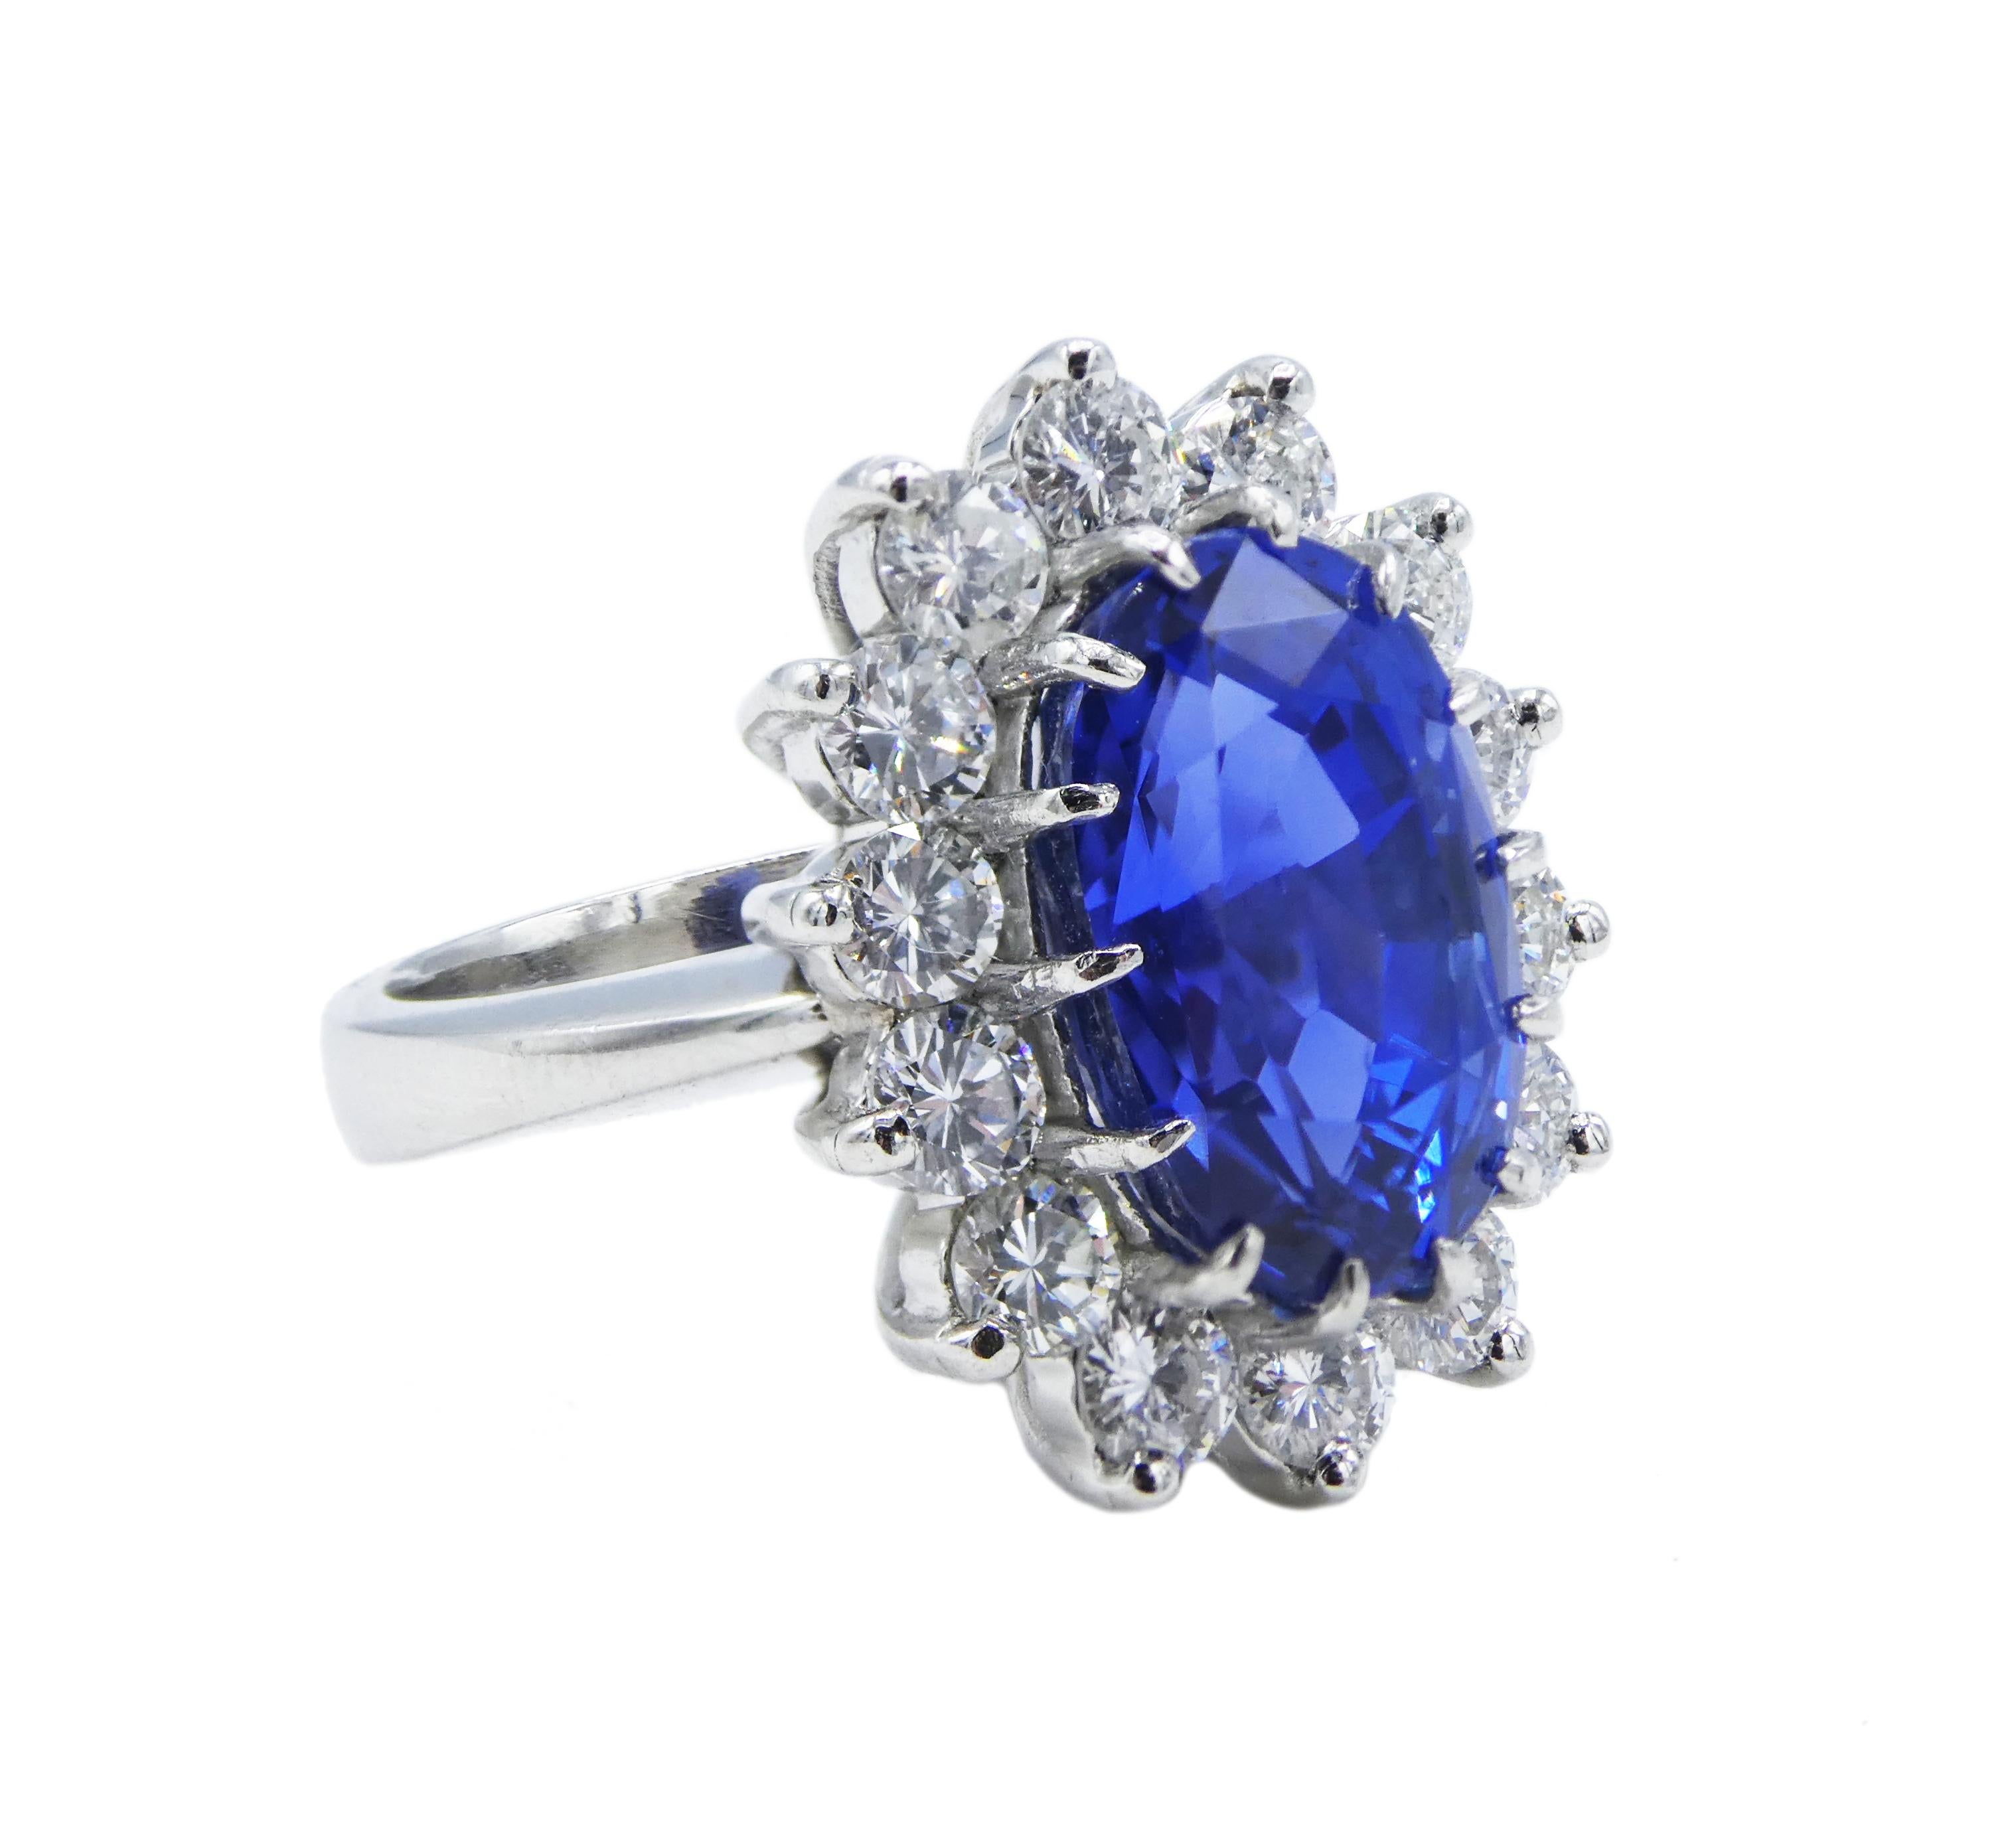 For sale is an AGL Certified Ceylon Blue No Heat Oval Sapphire weighing 7.31cts. The ring is made in  platinum and has a halo of round brilliant cut diamonds weighting approximately 1.40 CTW. The  ring is a size 4.75. 


AGL (American Gemological